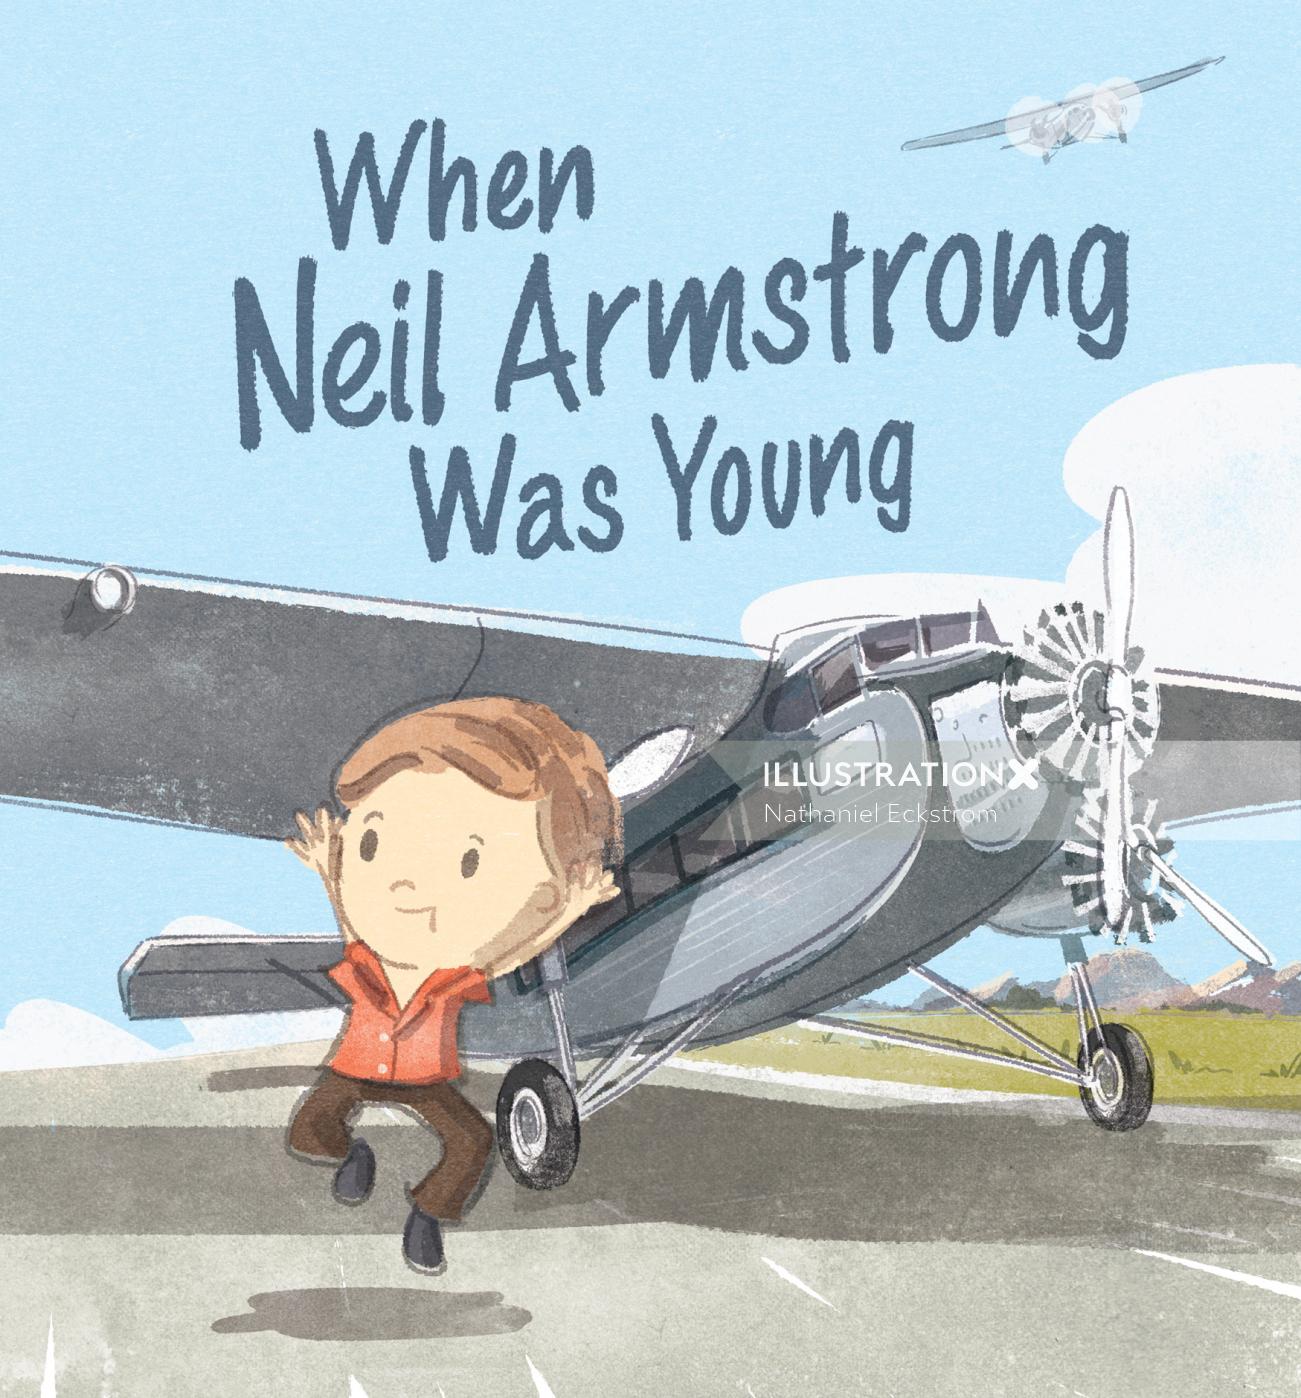 Children Neil armstrong picture book
